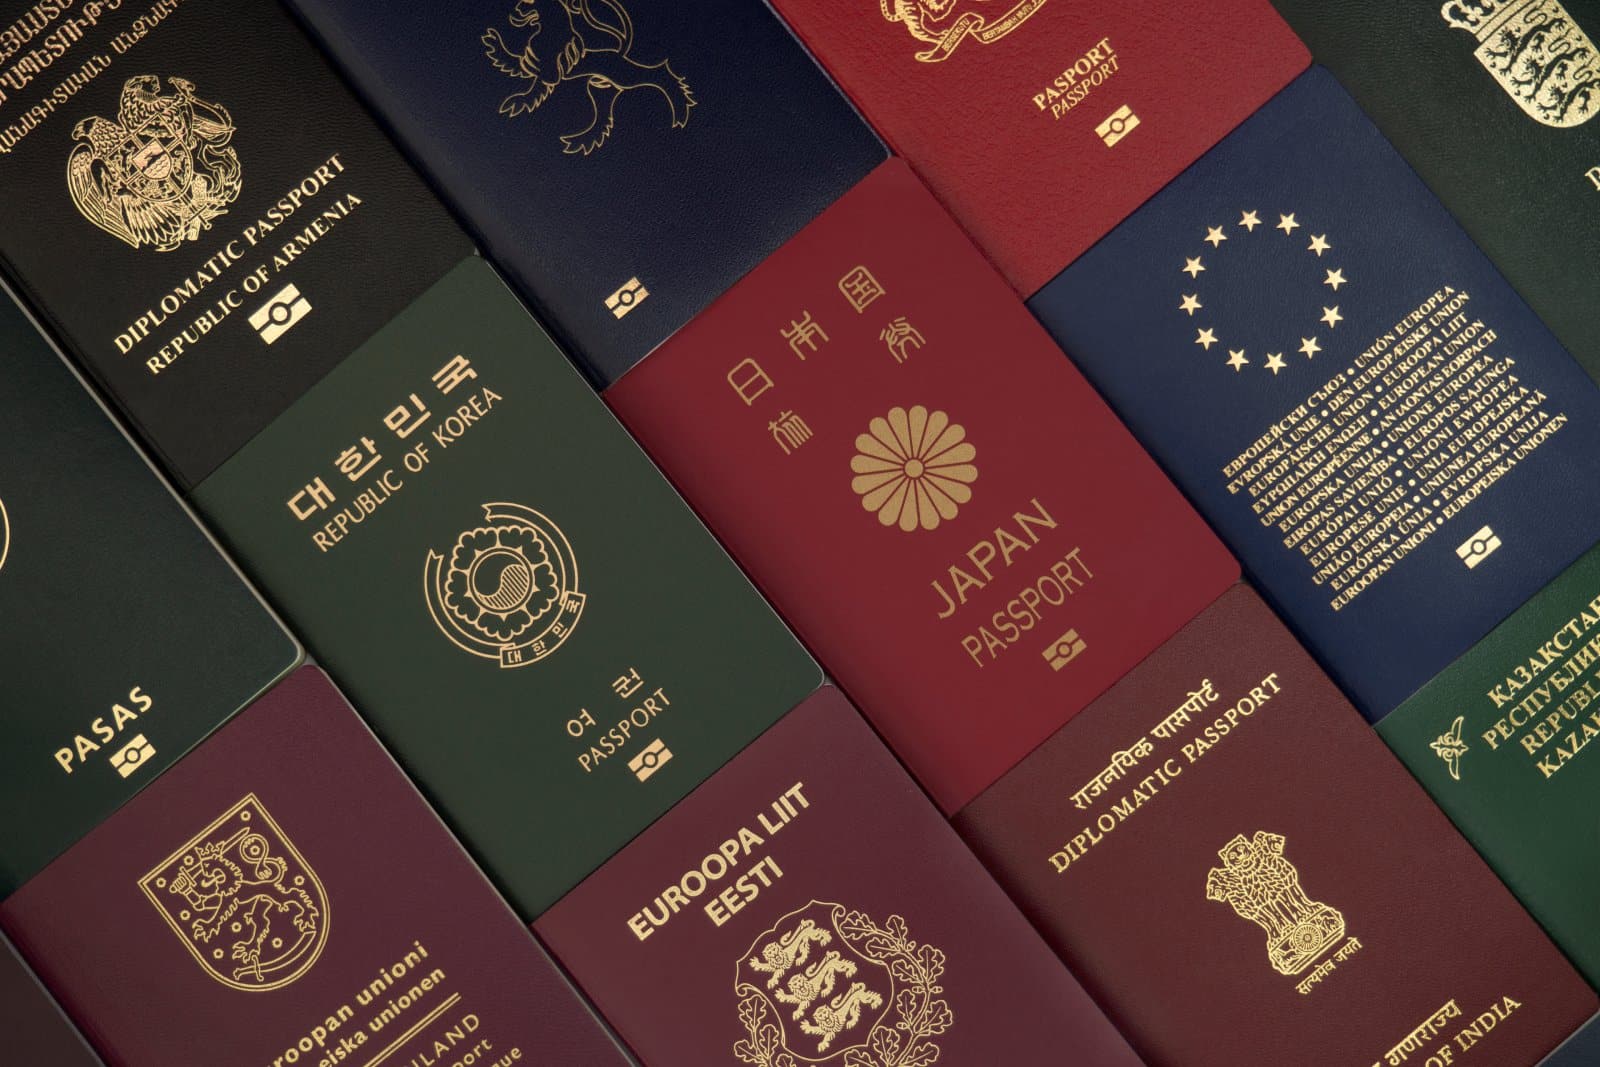 <p><span>Your passport is your most valuable document when traveling abroad. Keep it secure in a hotel safe or a secure, hidden compartment in your luggage. Having copies of your passport (the page with your personal information and any relevant visa pages) is crucial in emergencies.</span></p> <p><span>Store a digital copy in a secure cloud service and email a copy to yourself and a trusted contact back home. In the unfortunate event of losing your passport, these copies will be instrumental in proving your identity and facilitating the replacement process at your embassy or consulate.</span></p> <p><b>Insider’s Tip: </b><span>Keep your passport safe at all times and carry physical and digital copies in case of loss or theft.</span></p>